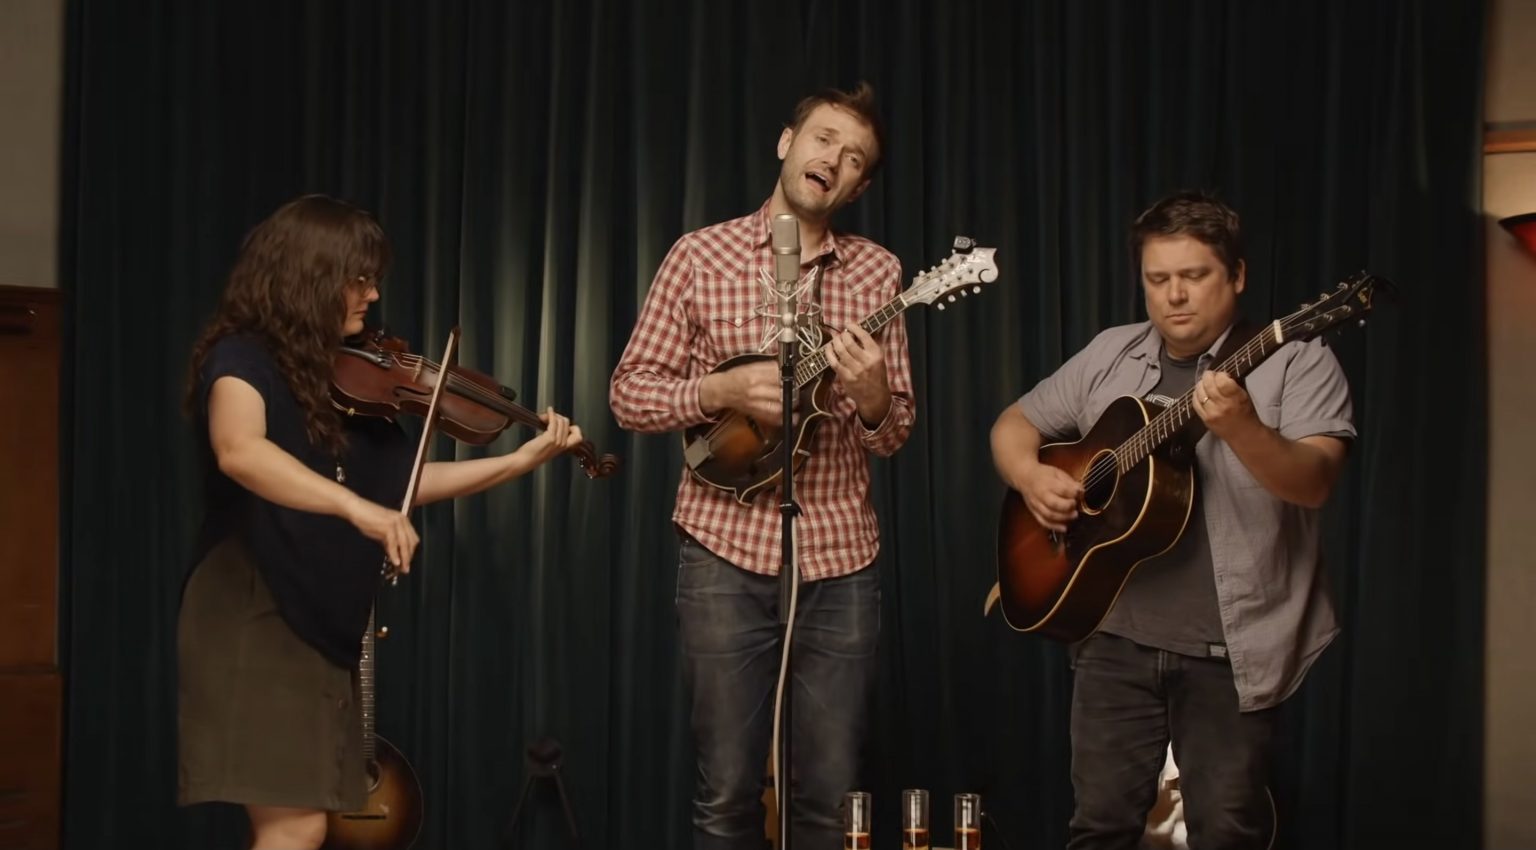 WATCH Nickel Creek Return to "Helena" for Their Livecreek Experience